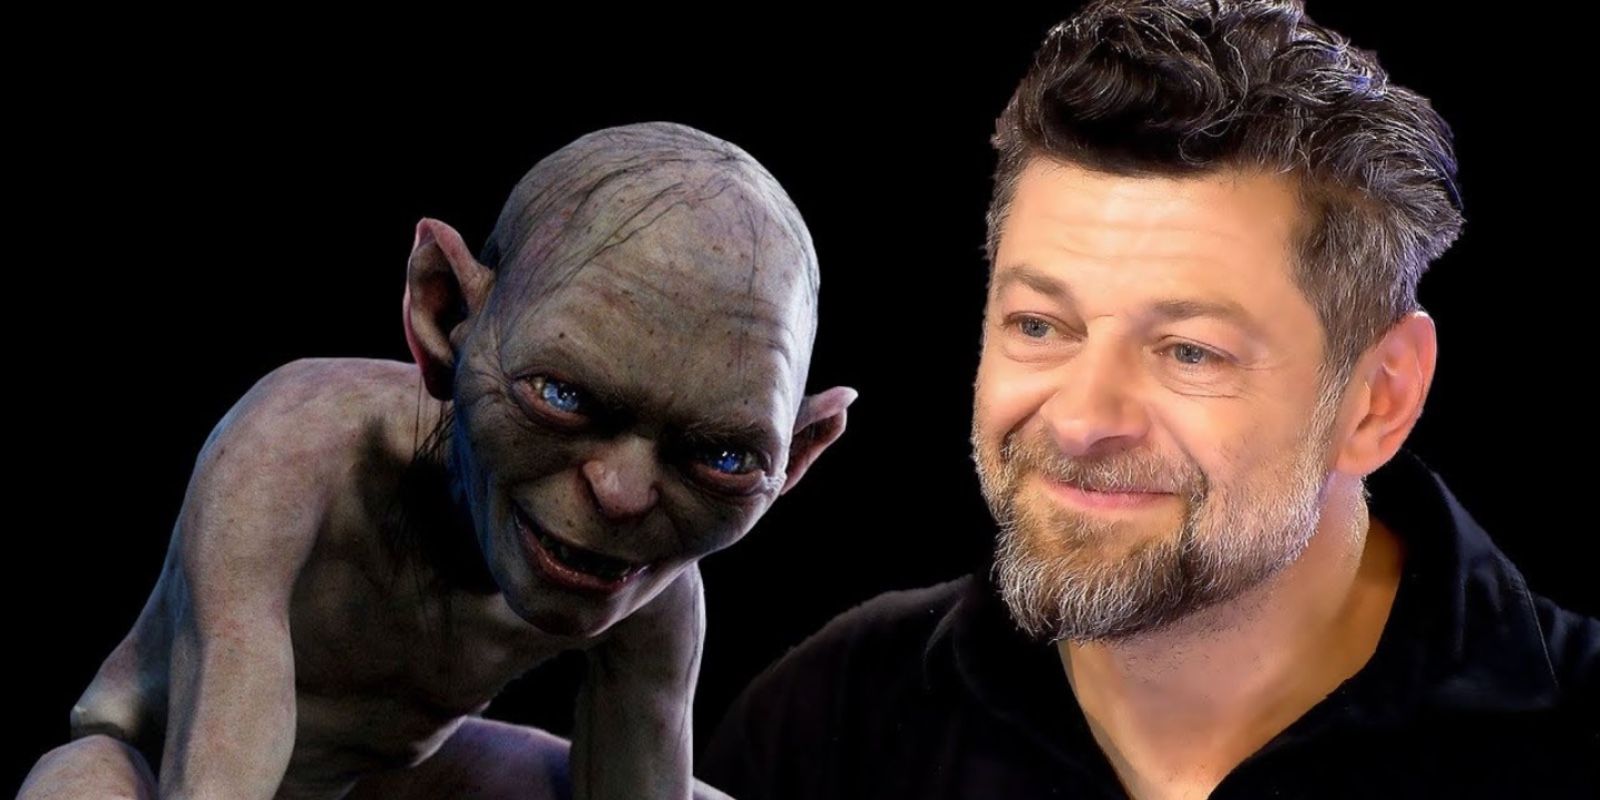 Andy Serkis Voiced 132 Different The Lord of the Rings Characters